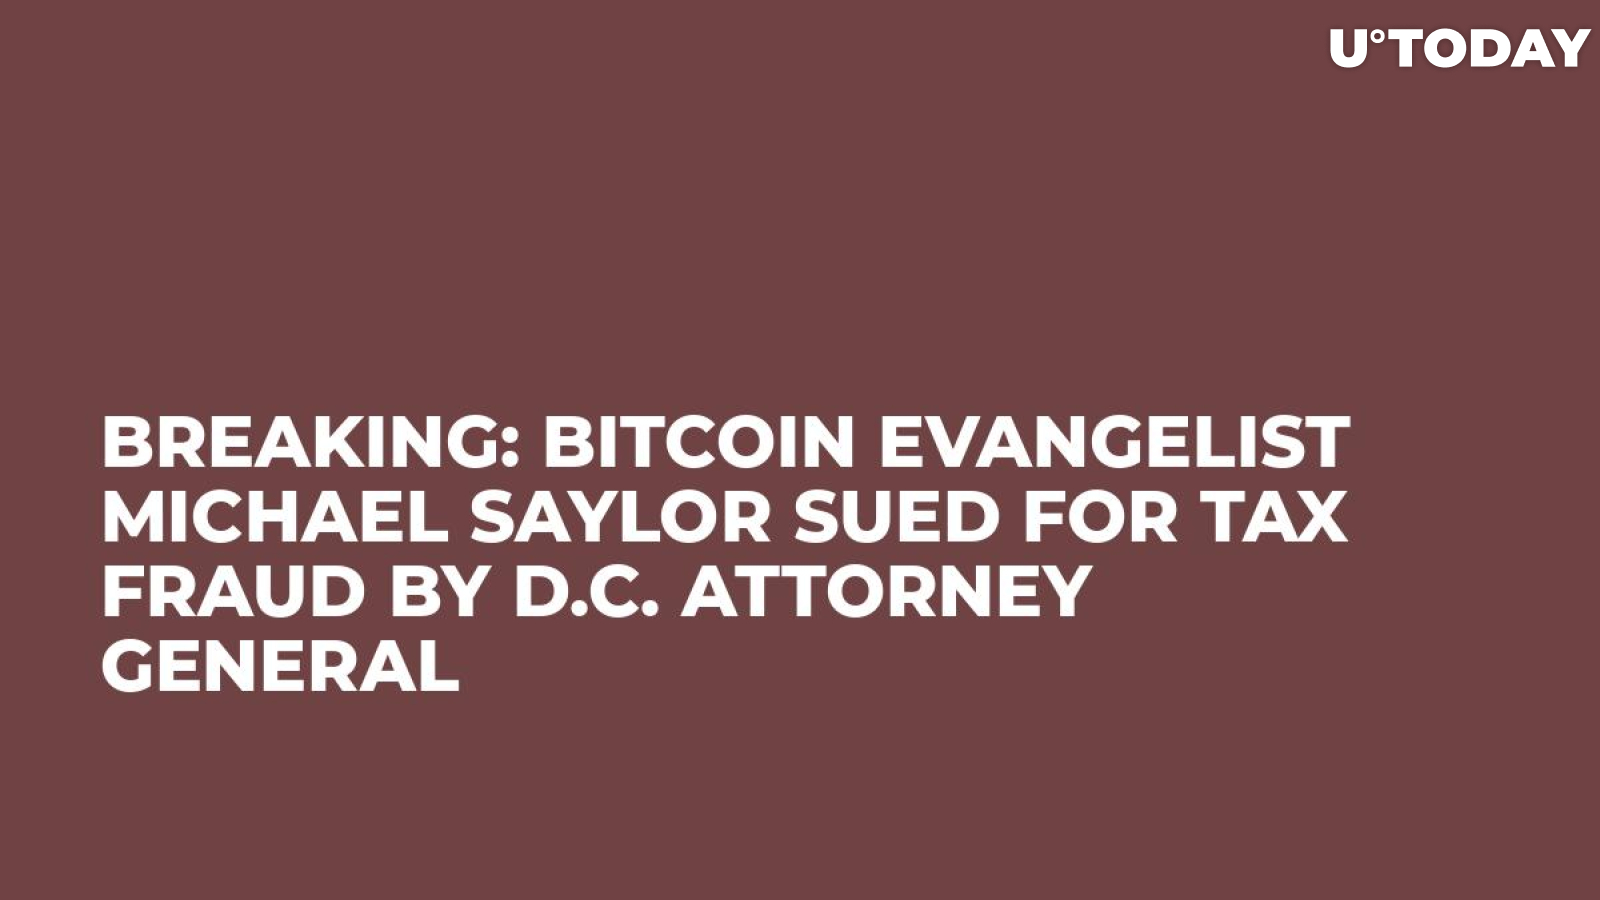 BREAKING: Bitcoin Evangelist Michael Saylor Sued for Tax Fraud by D.C. Attorney General